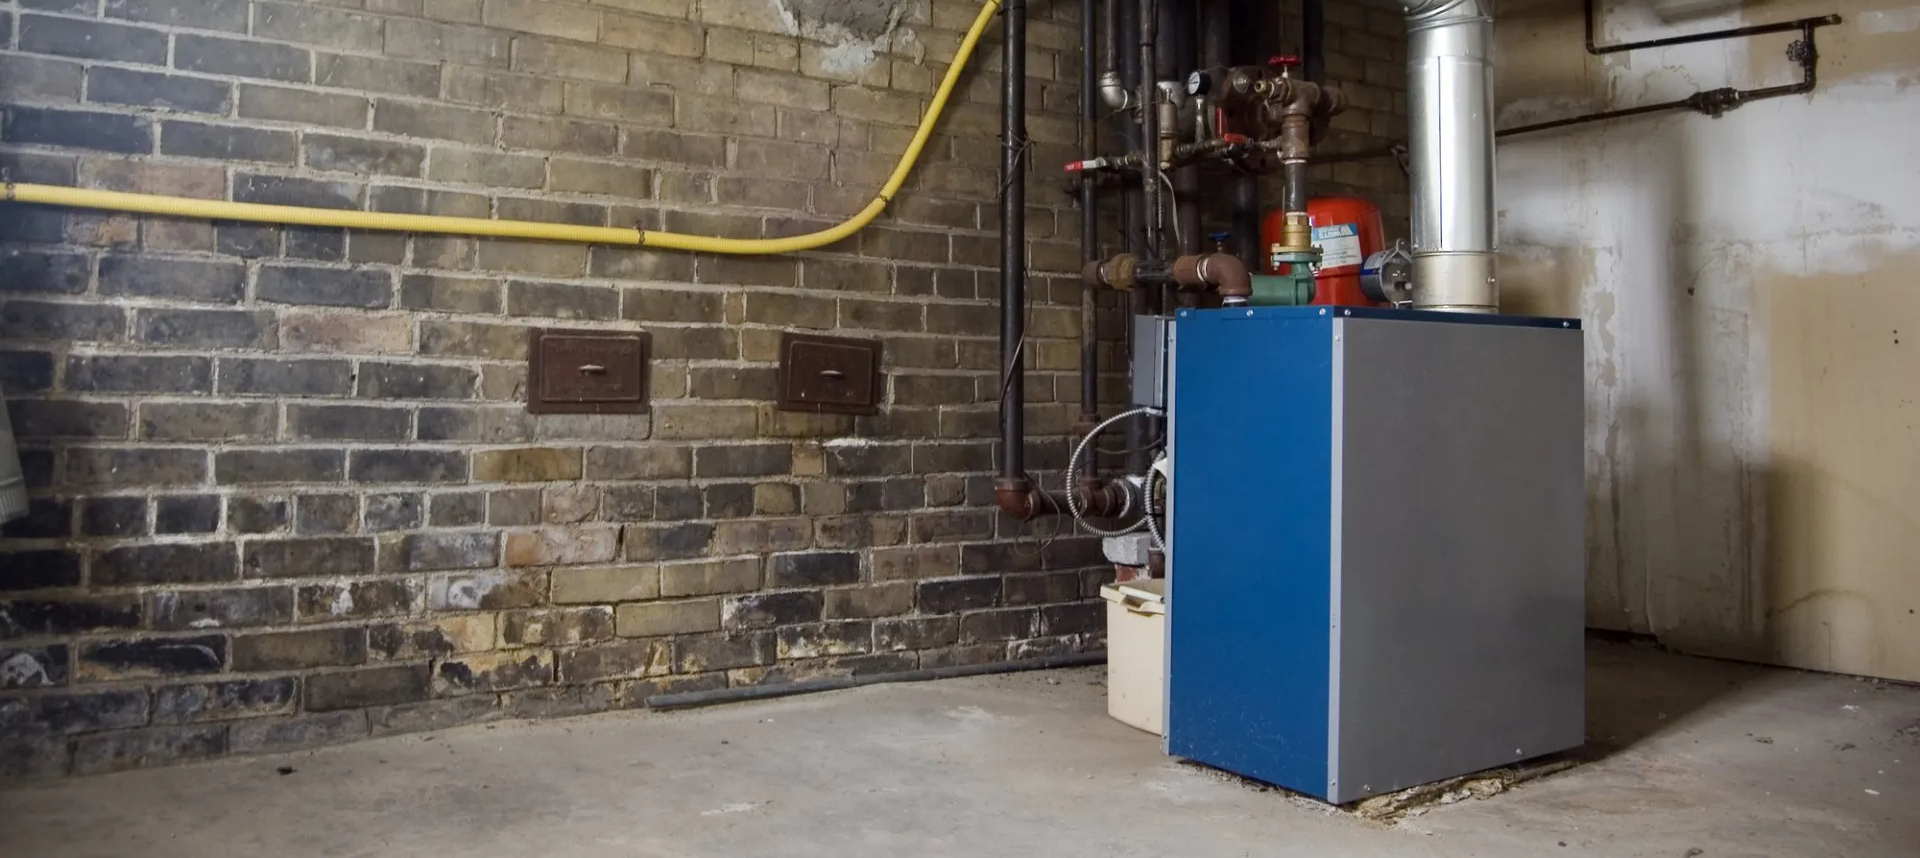 blue and grey furnace in empty basement